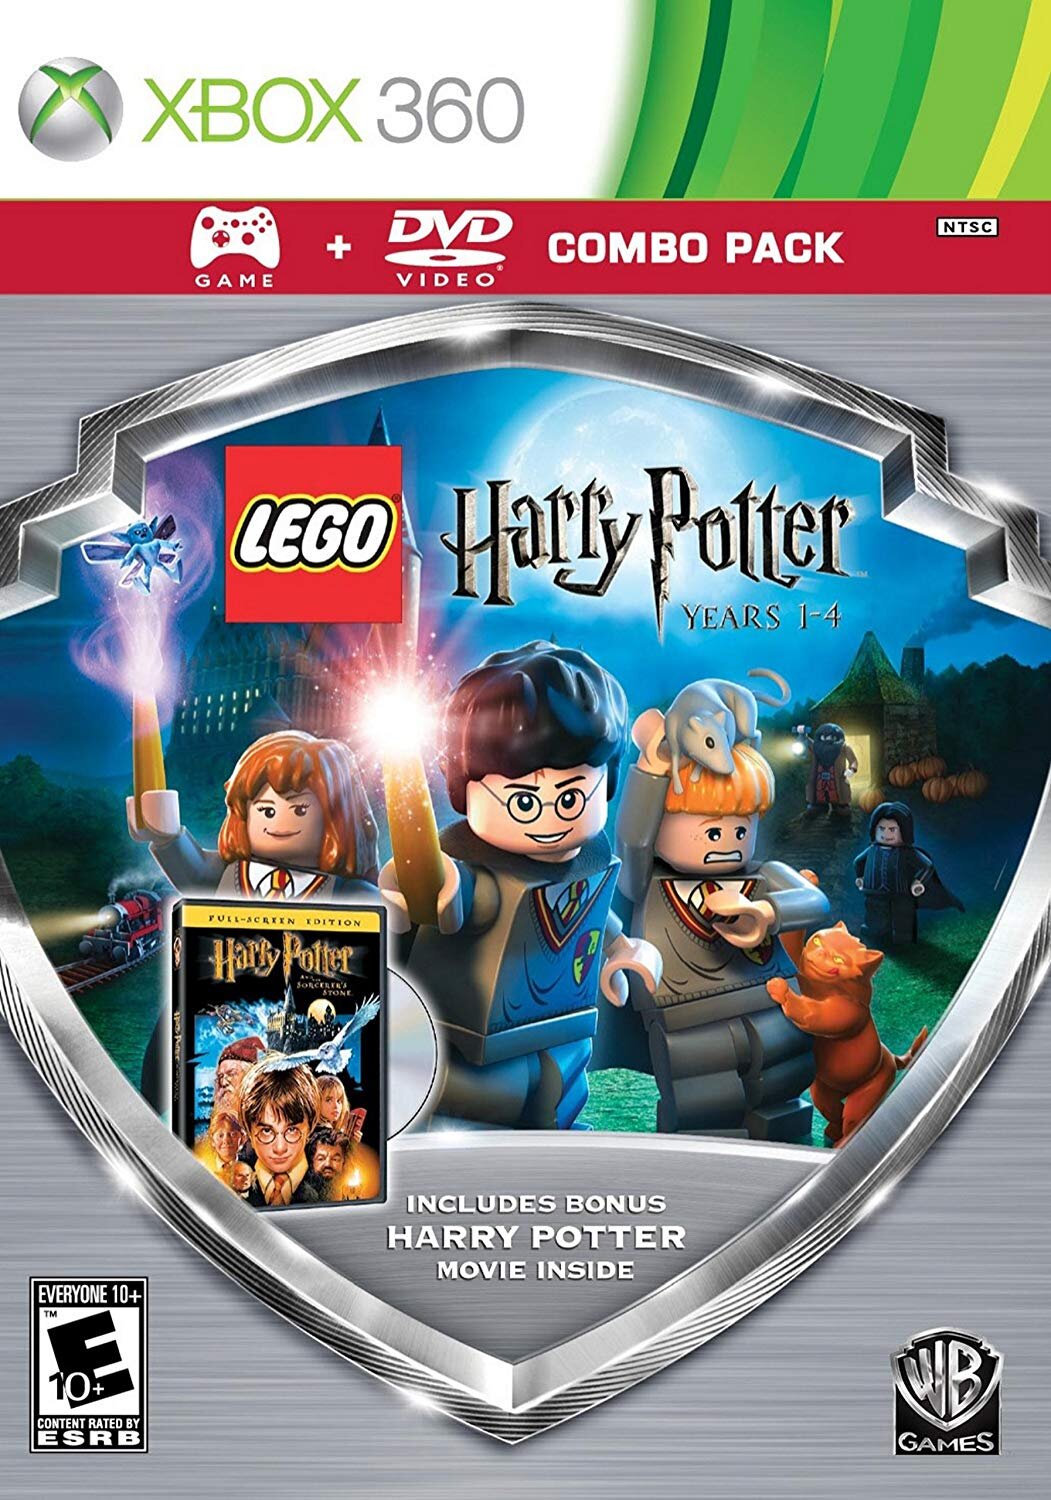 LEGO Harry Potter: Years 1-4 Cheats For Wii PlayStation 3 Xbox 360 DS PSP  PC iOS (iPhone/iPad) - GameSpot